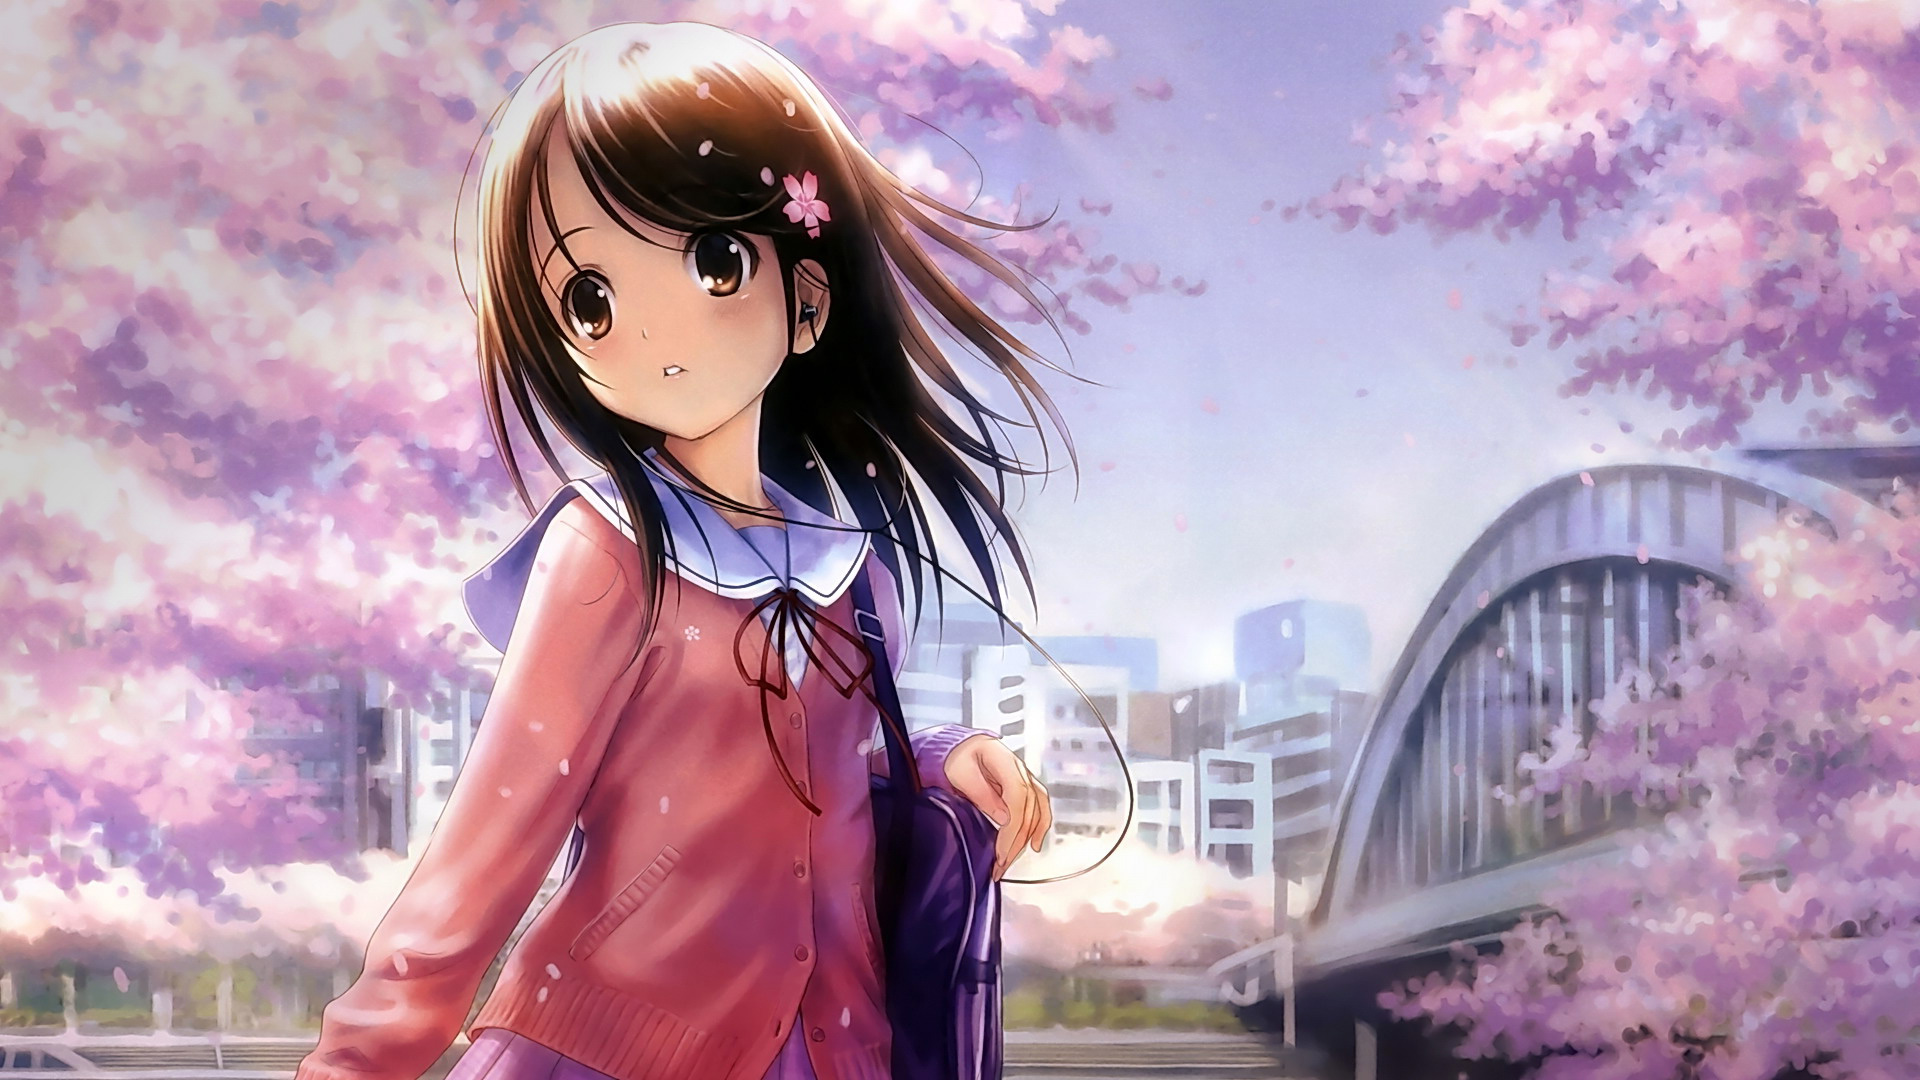 Best Animated Anime Wallpapers | Design